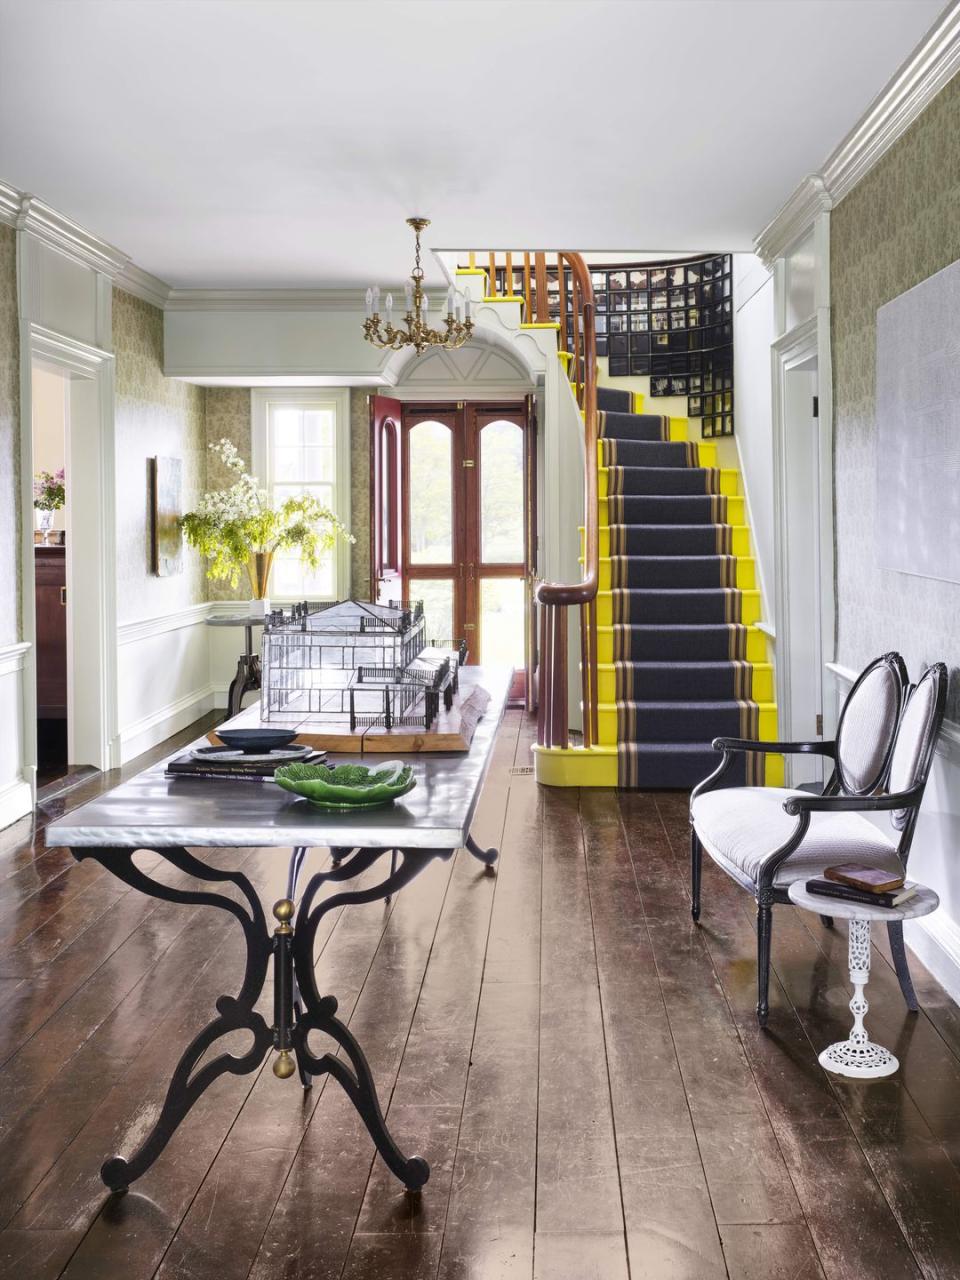 grand entry with bright yellow staircase and traditional furnishings